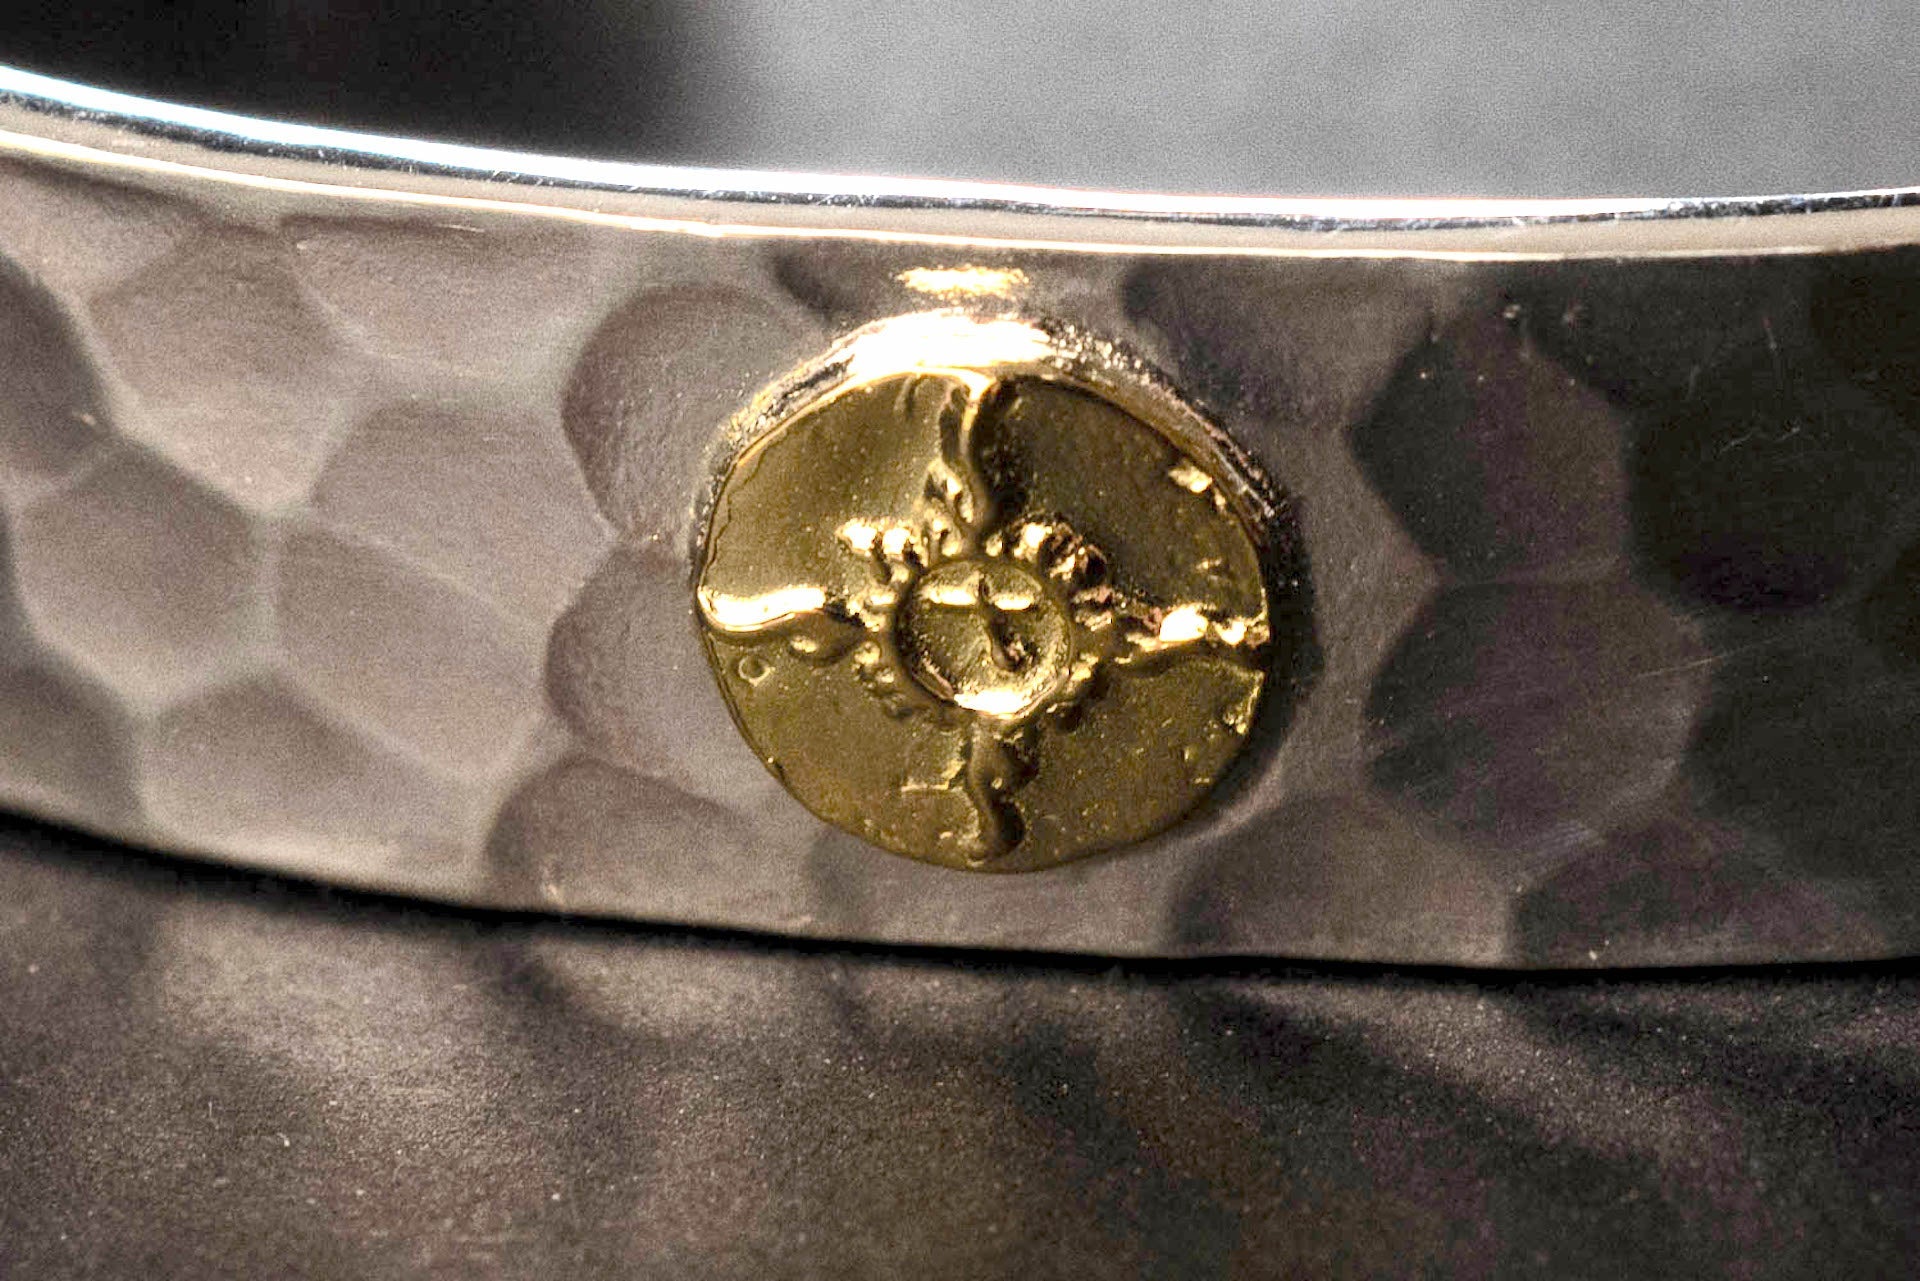 First Arrow's 12mm Silver Hammered Bangle with 18k Gold Emblem (BR-002)